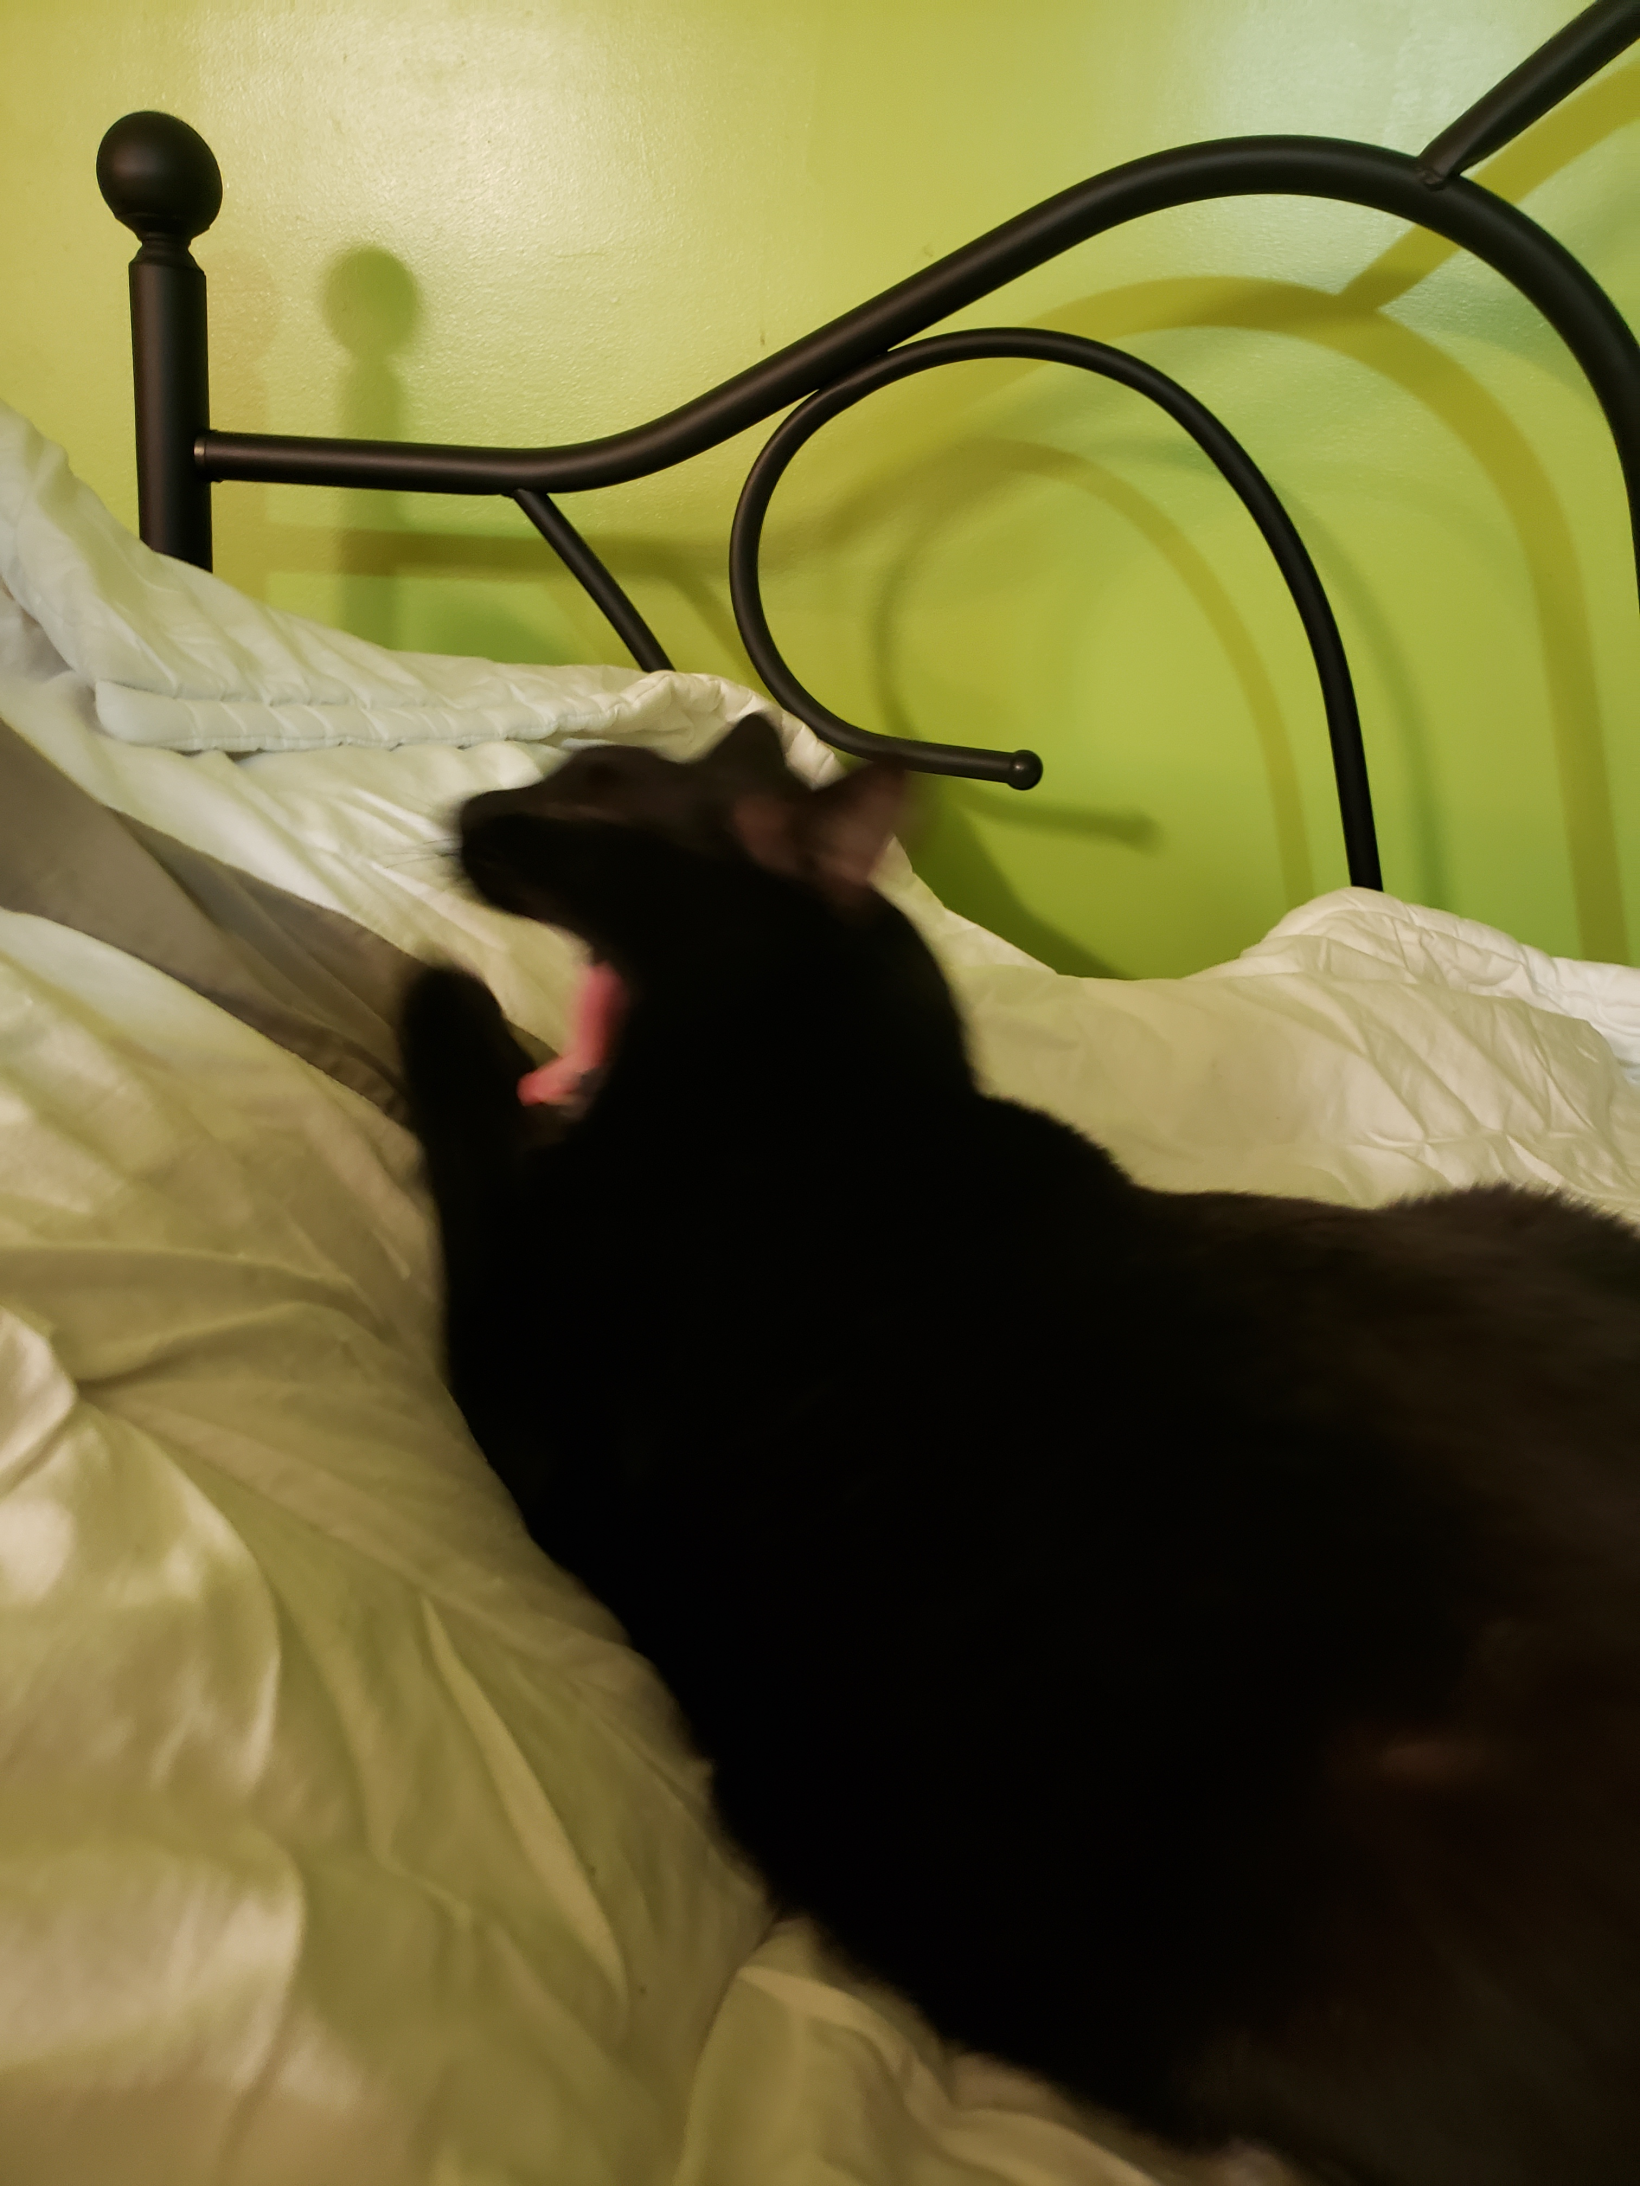 The yawn of cat Blank Meme Template